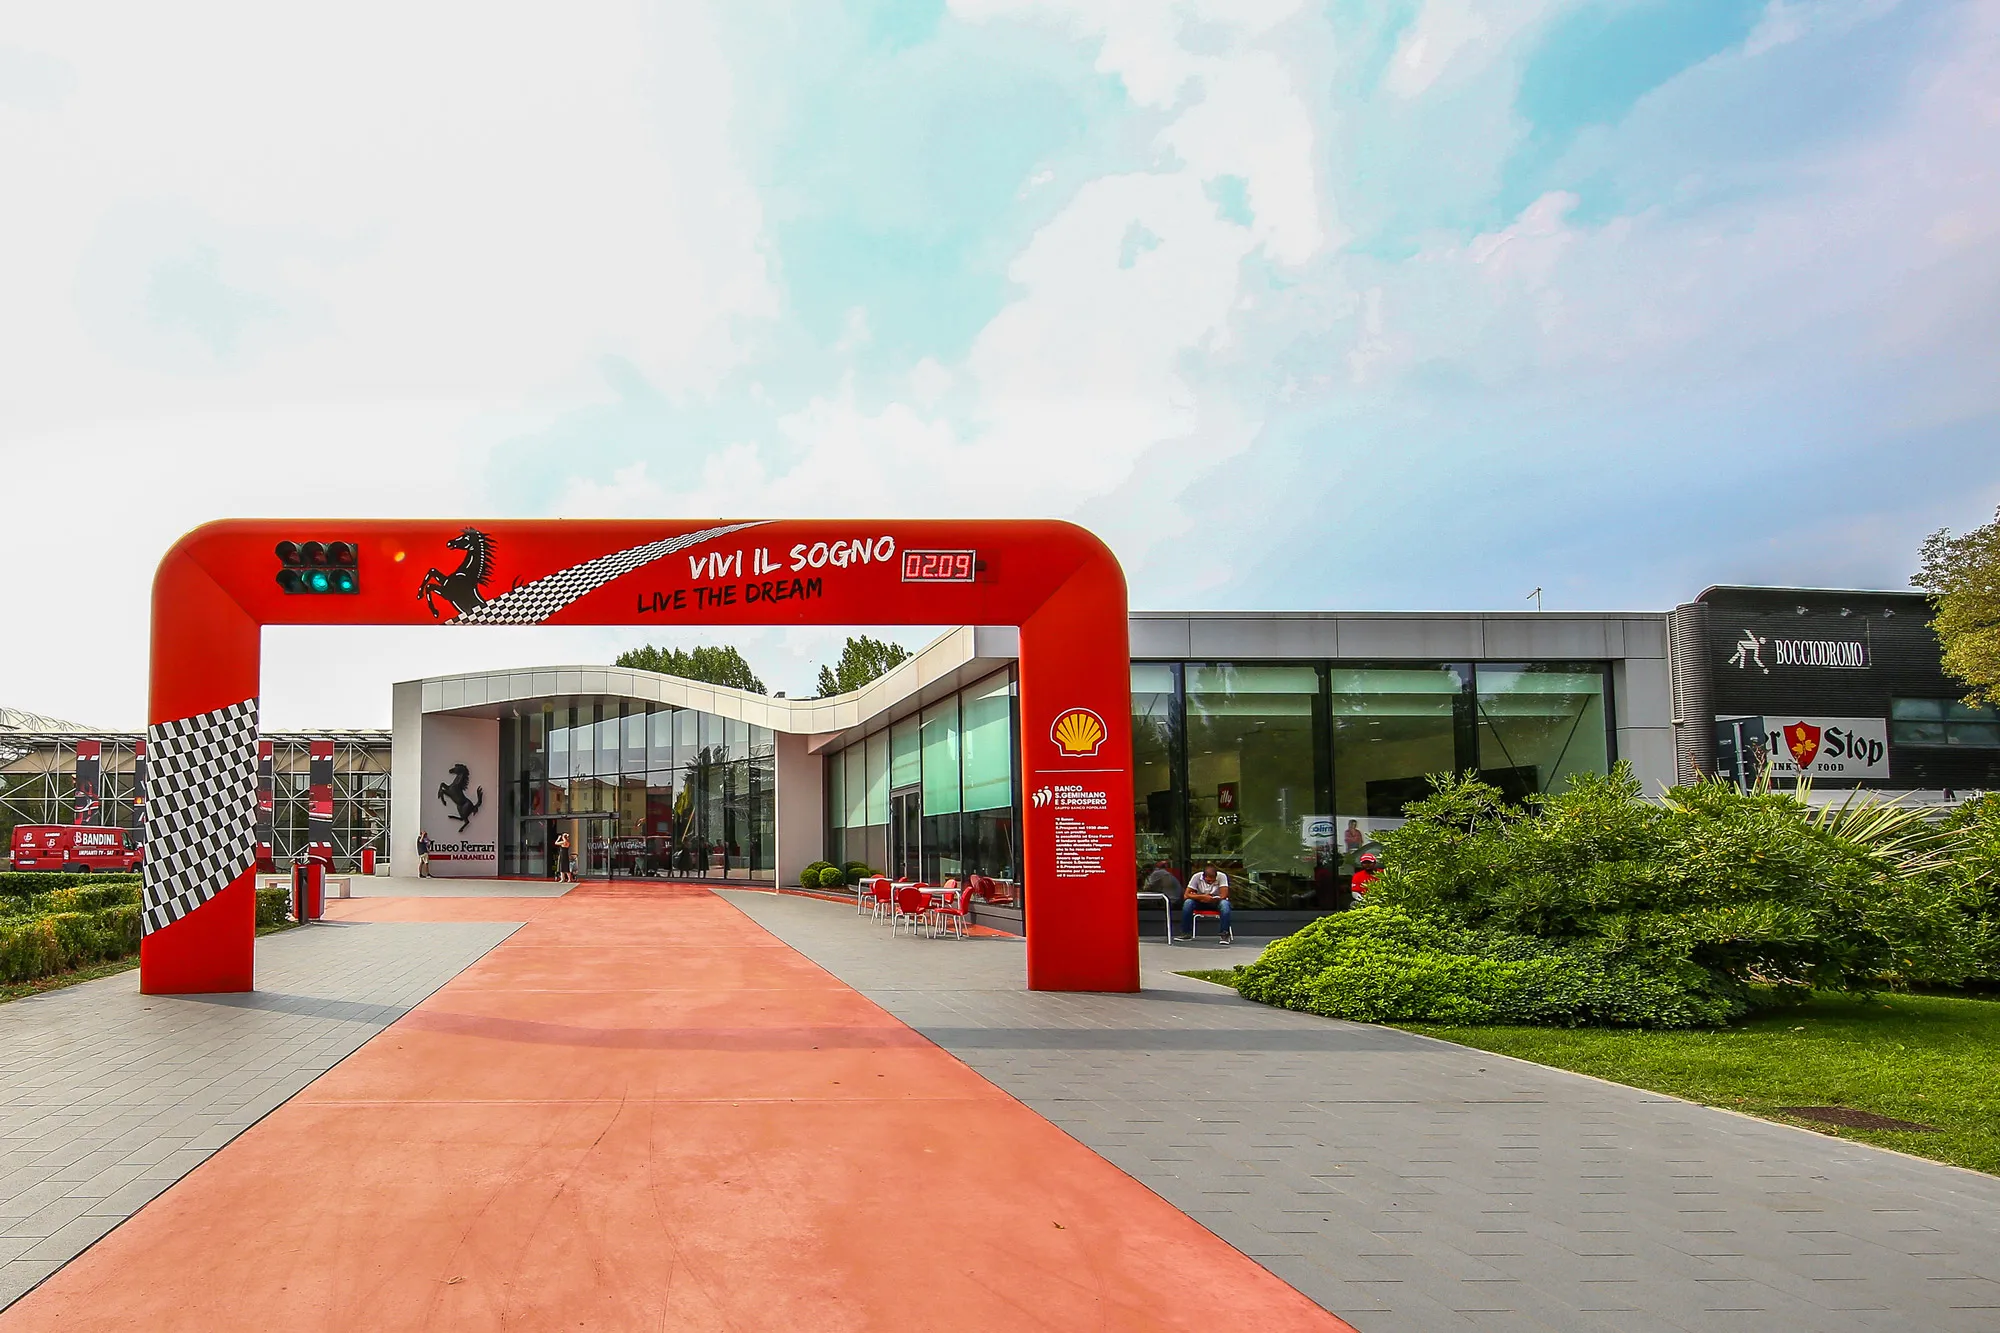 Enjoy the rare opportunity to drive supercars in their home territory at Maranello